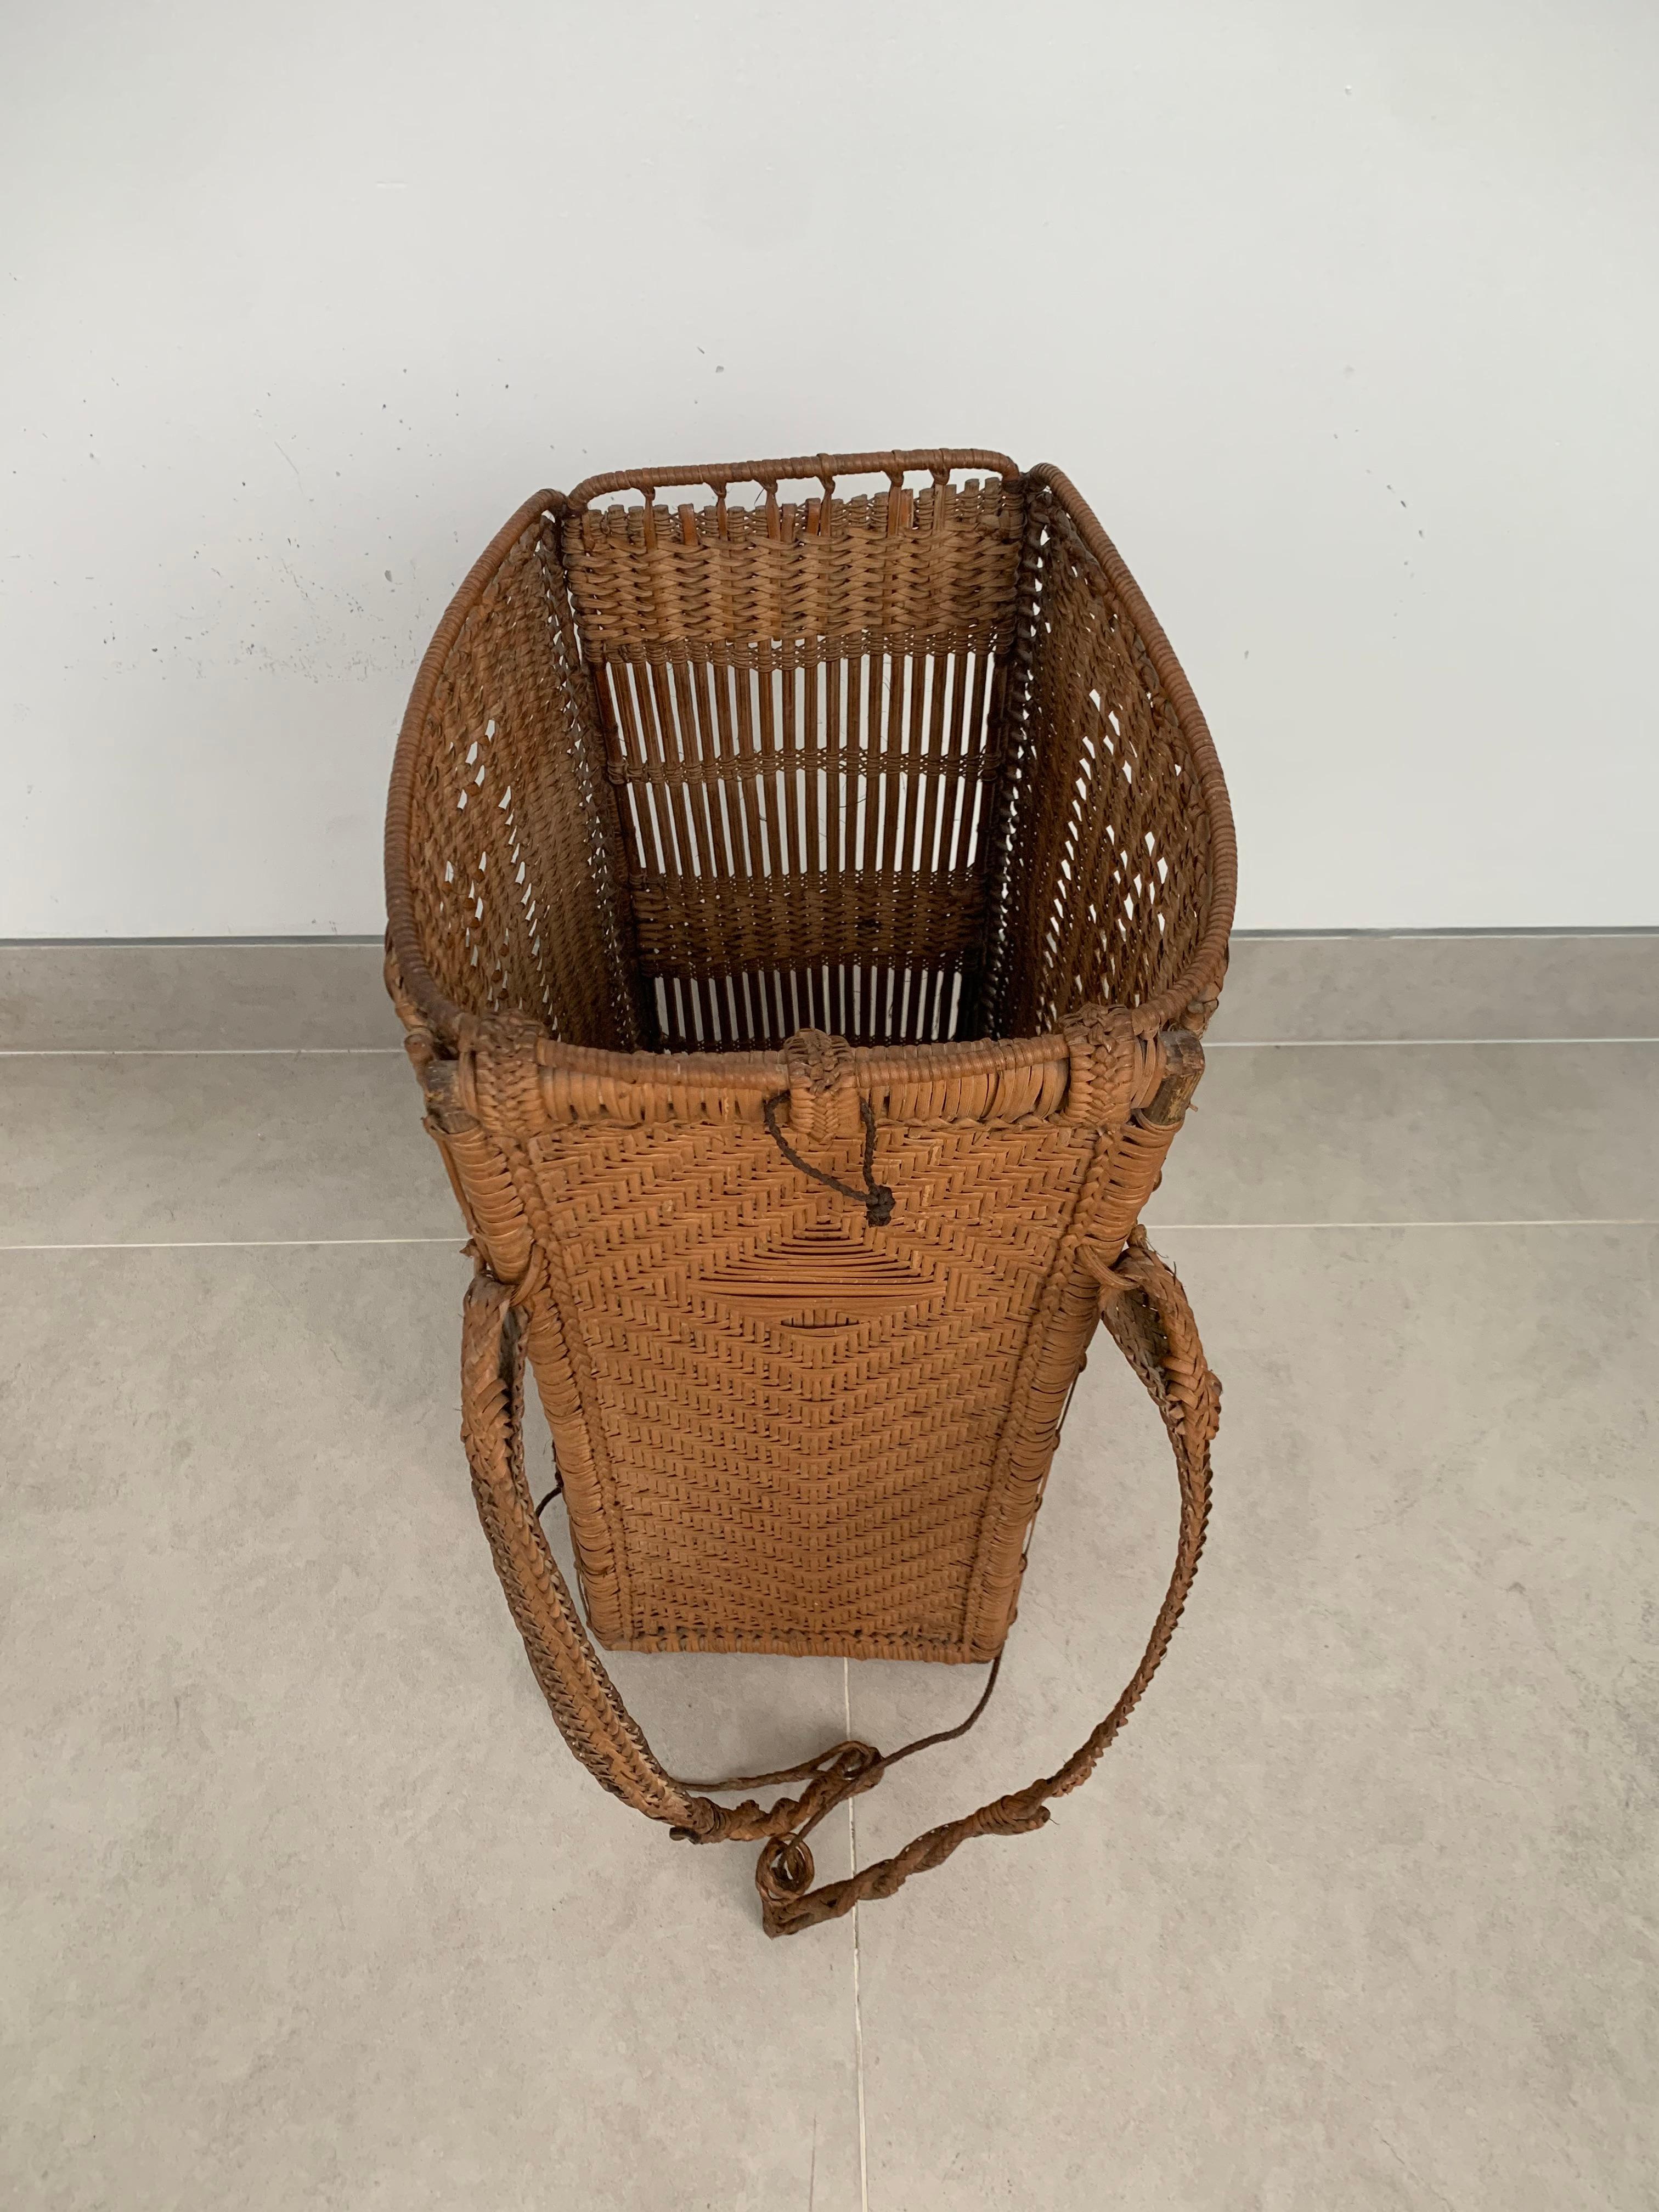 This mid-20th century hand-woven basket originates from the Dayak tribe of Borneo, crafted with rattan fibres. These baskets were used to carry leaves, fruit, grain and wood and features wonderfully aged fibres and wood patina. This basket has a